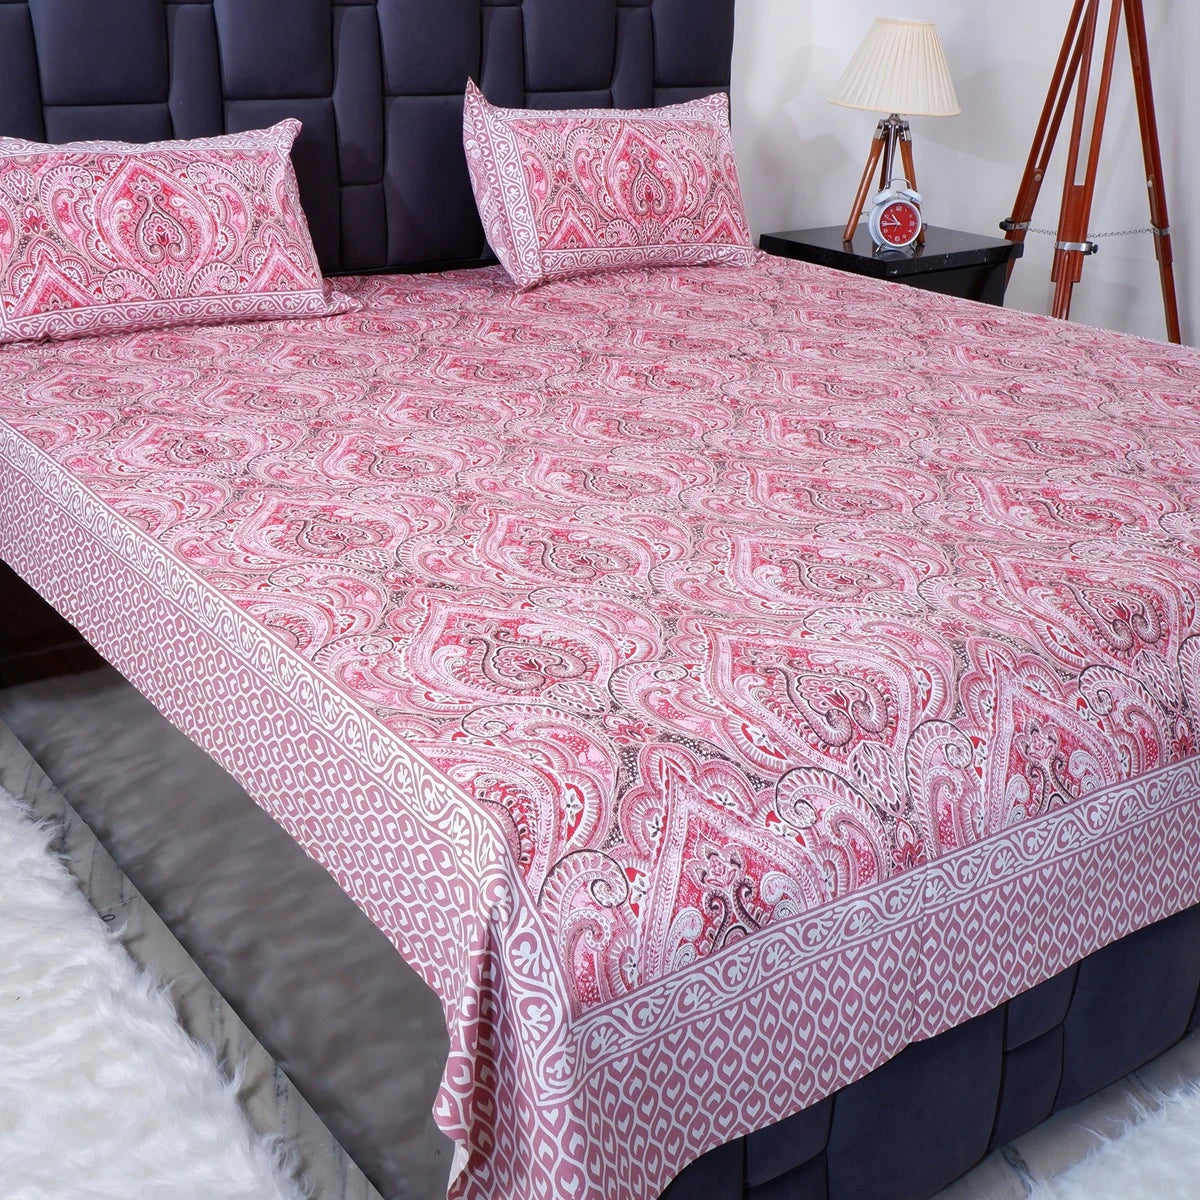 100% Pure Cotton Bed Sheet | Pink Perfection Sheets